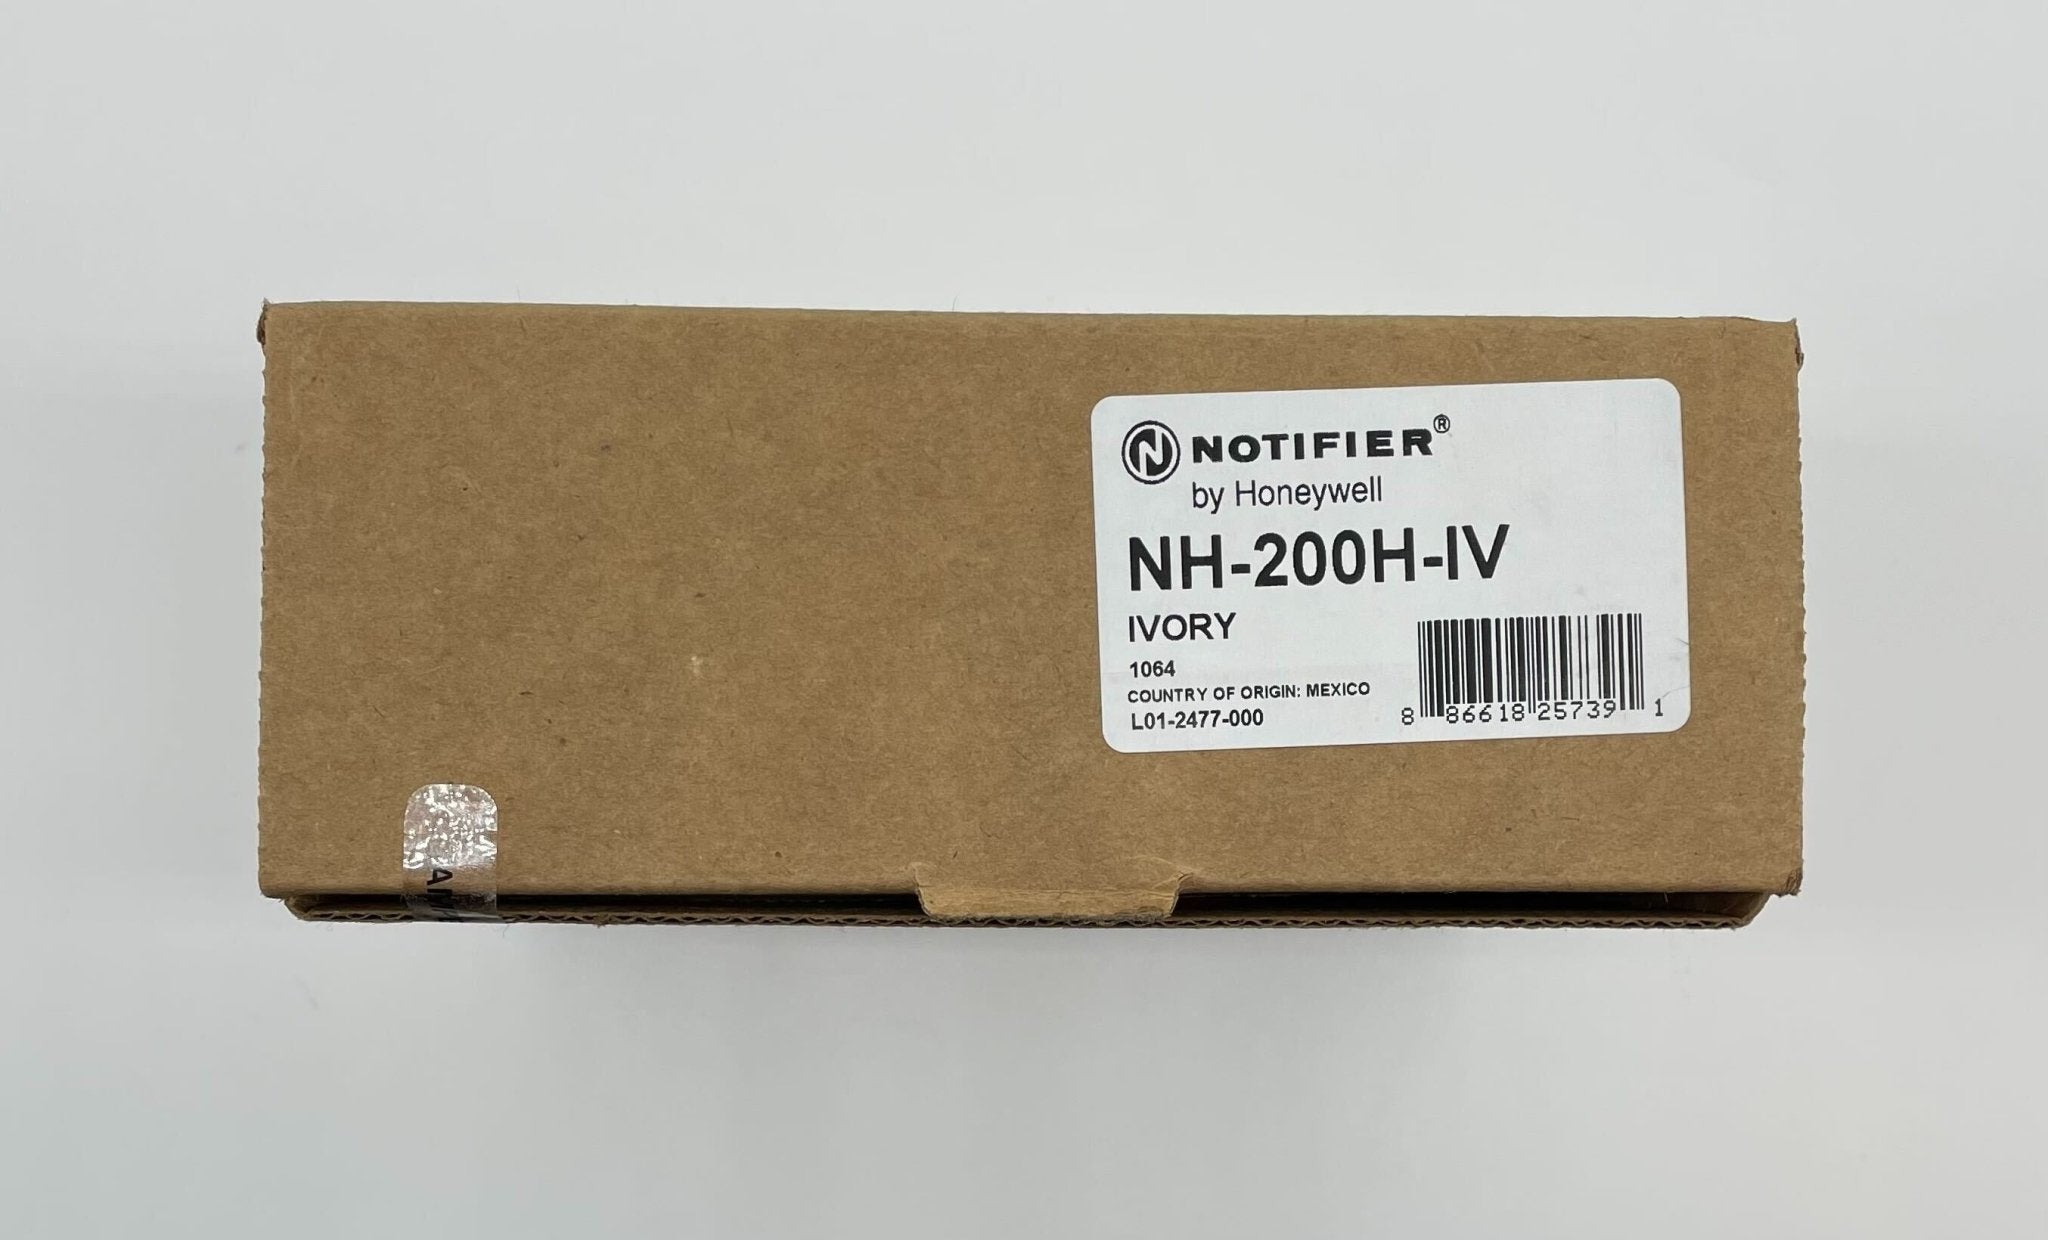 Notifier NH-200H-IV - The Fire Alarm Supplier